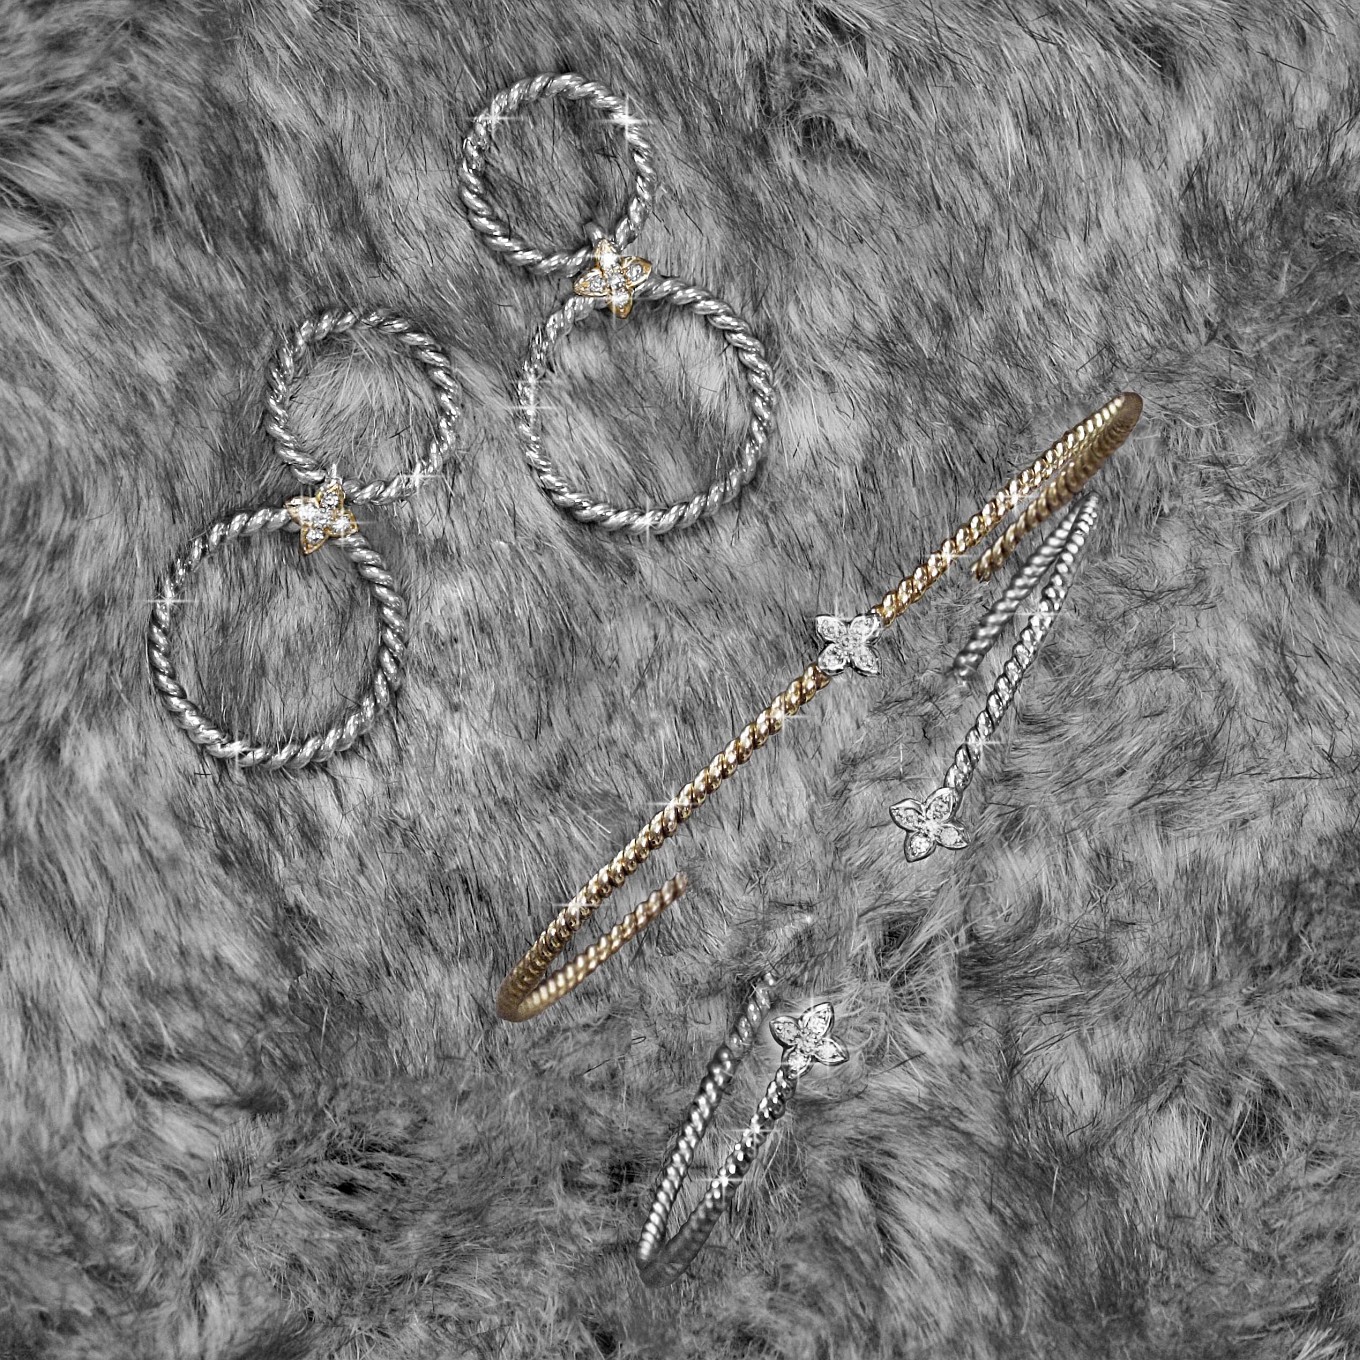 Sterling silver Braided Double hoop earrings with diamond sevilla motif in yellow gold.From a selection of Sevilla Braid cuffs & bangles in silver, gold & diamonds.Yellow gold braid cuff with one sevilla diamond motif.White gold braid cuff with two sevilla diamond motif.